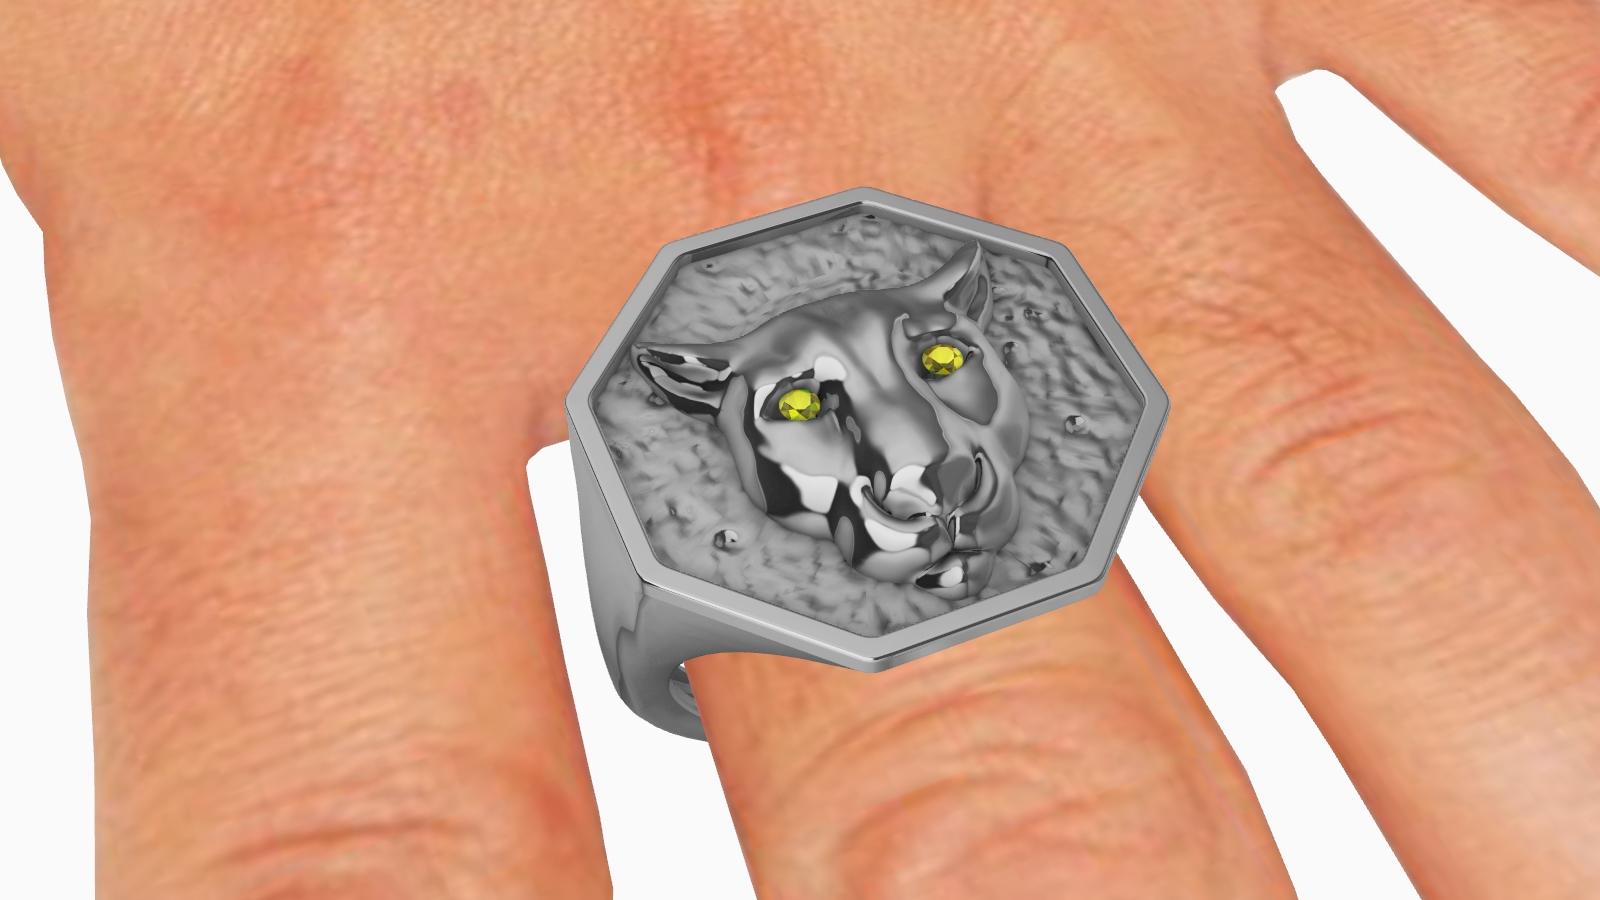 For Sale:  Platinum Mens Cougar Signet Ring with Yellow Sapphire Eyes 4